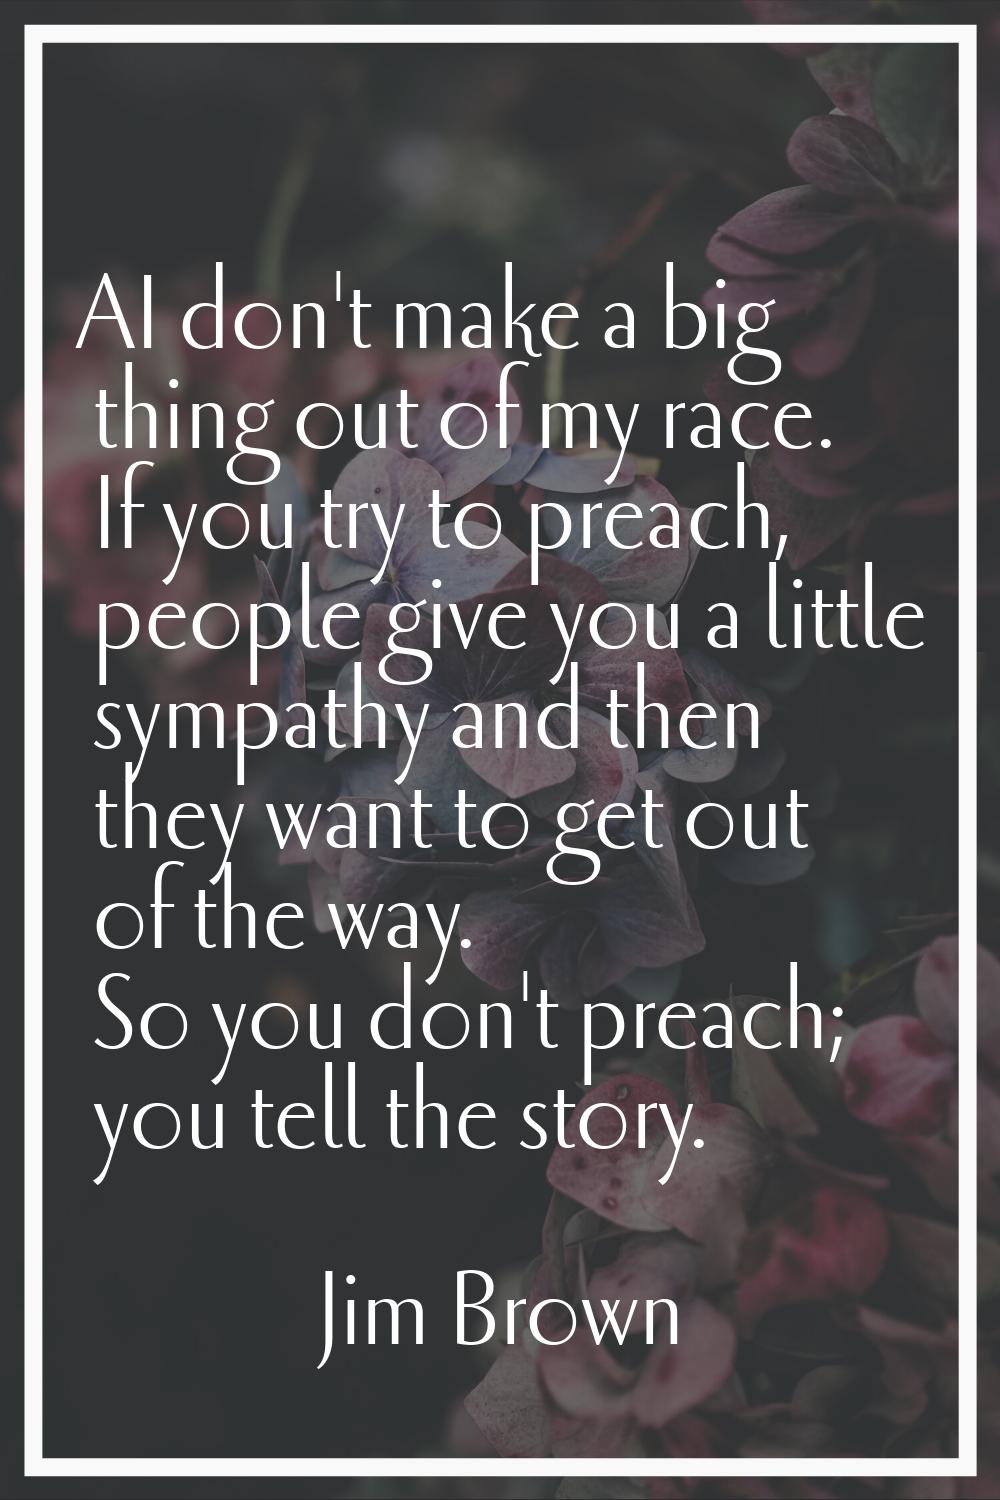 AI don't make a big thing out of my race. If you try to preach, people give you a little sympathy a